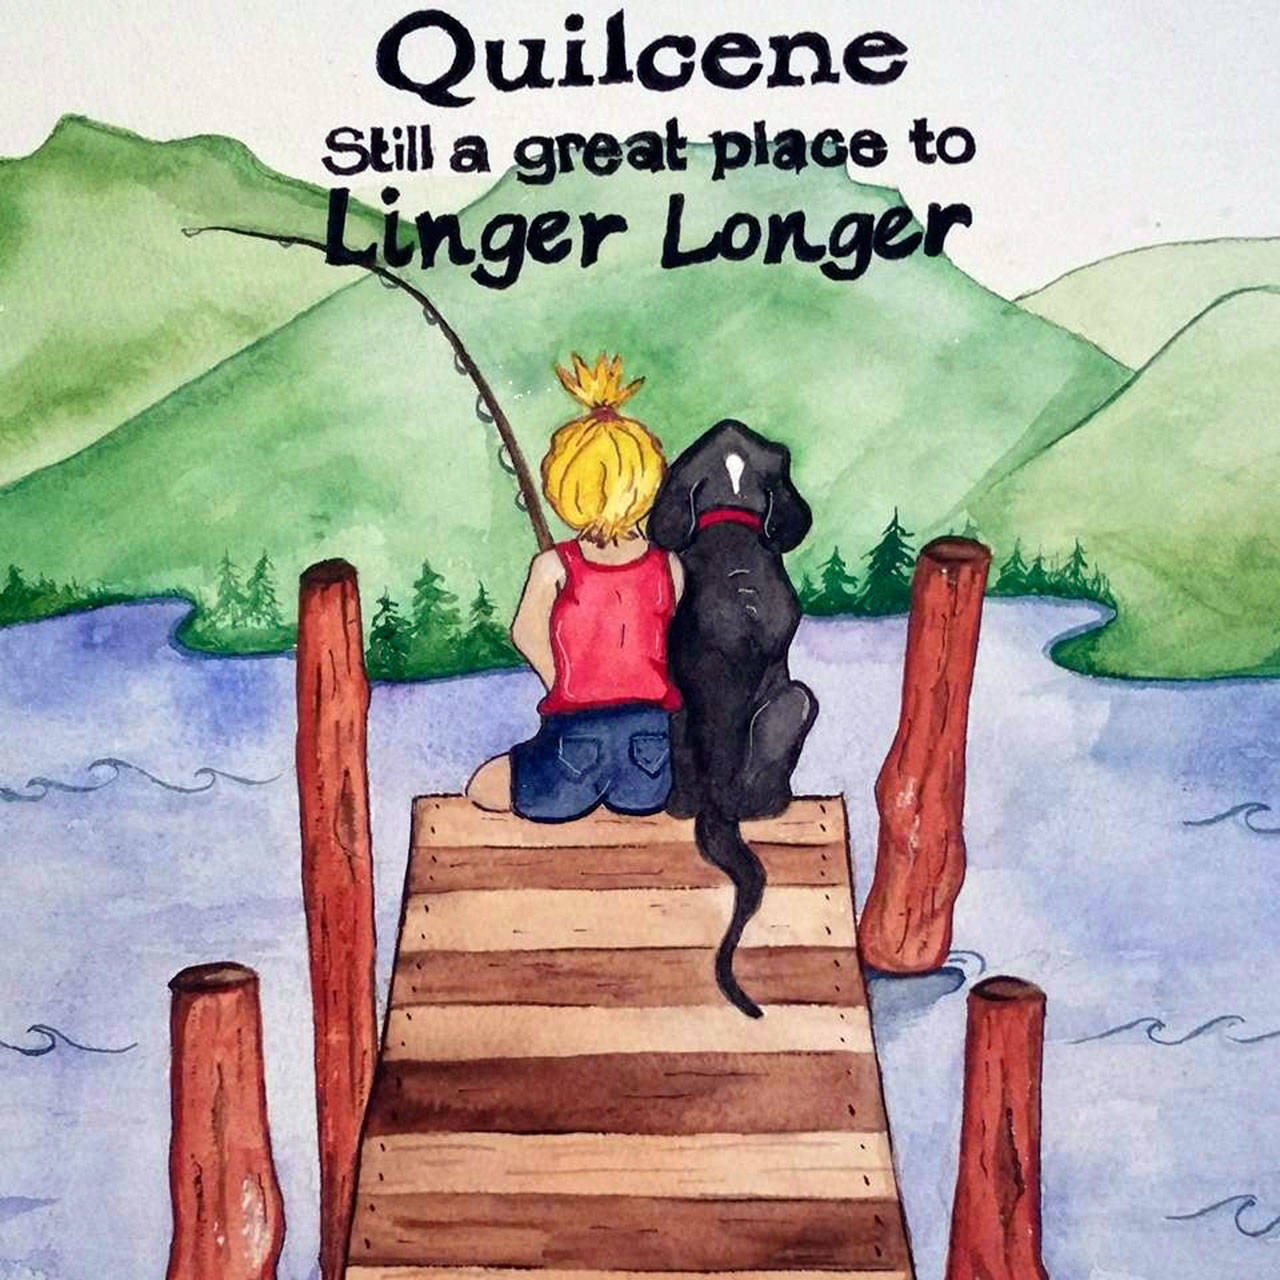 The theme of Quilcene’s 2017 Fair and Parade, going on Saturday from 11 a.m. to dusk and Sunday from 11 a.m. to 4 p.m., is “Still a great place to Linger Longer.” (Andrea Pleines)